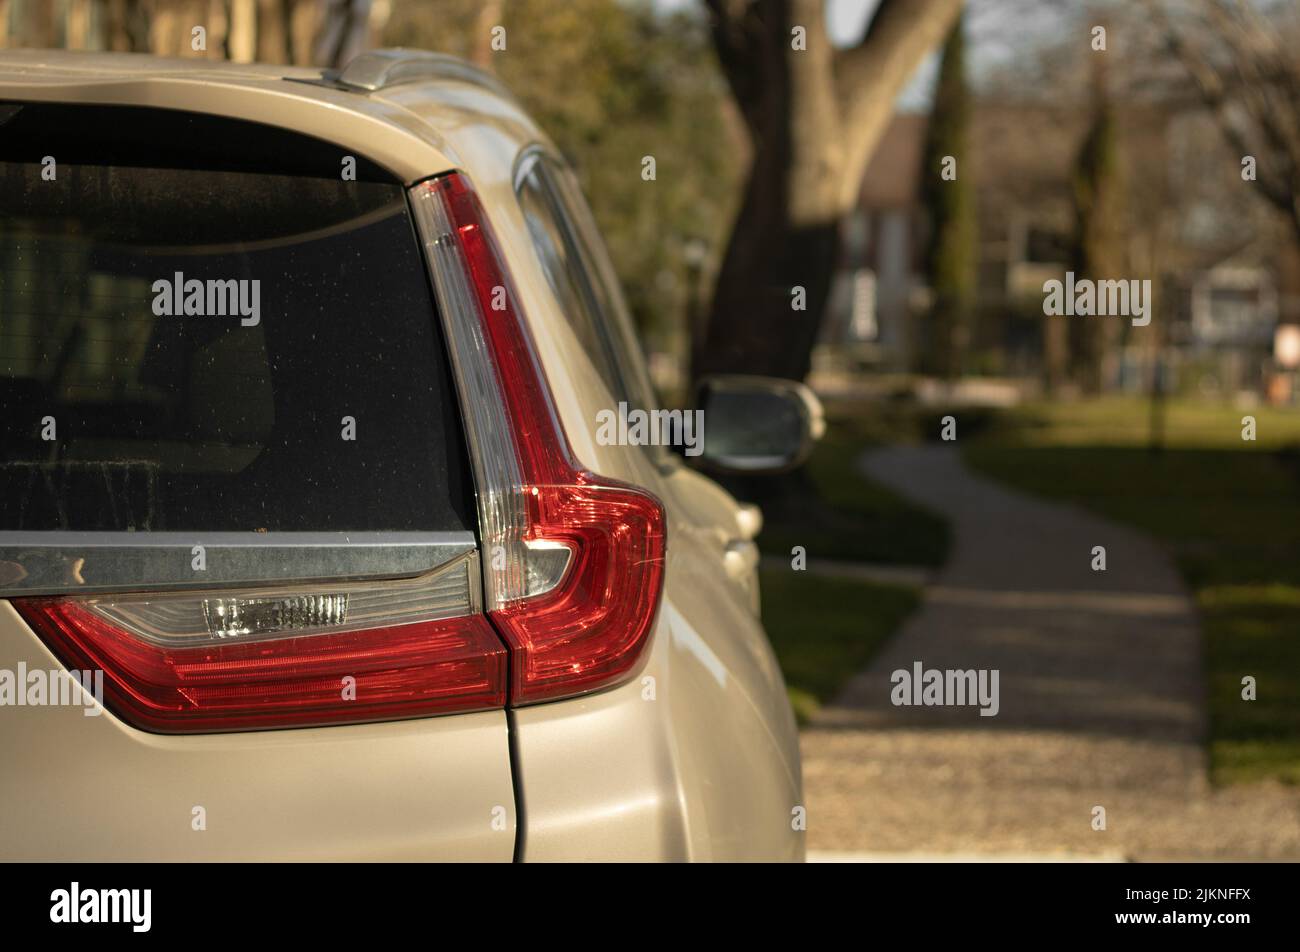 A suv sports utility vehicle in a small neighborhood Stock Photo